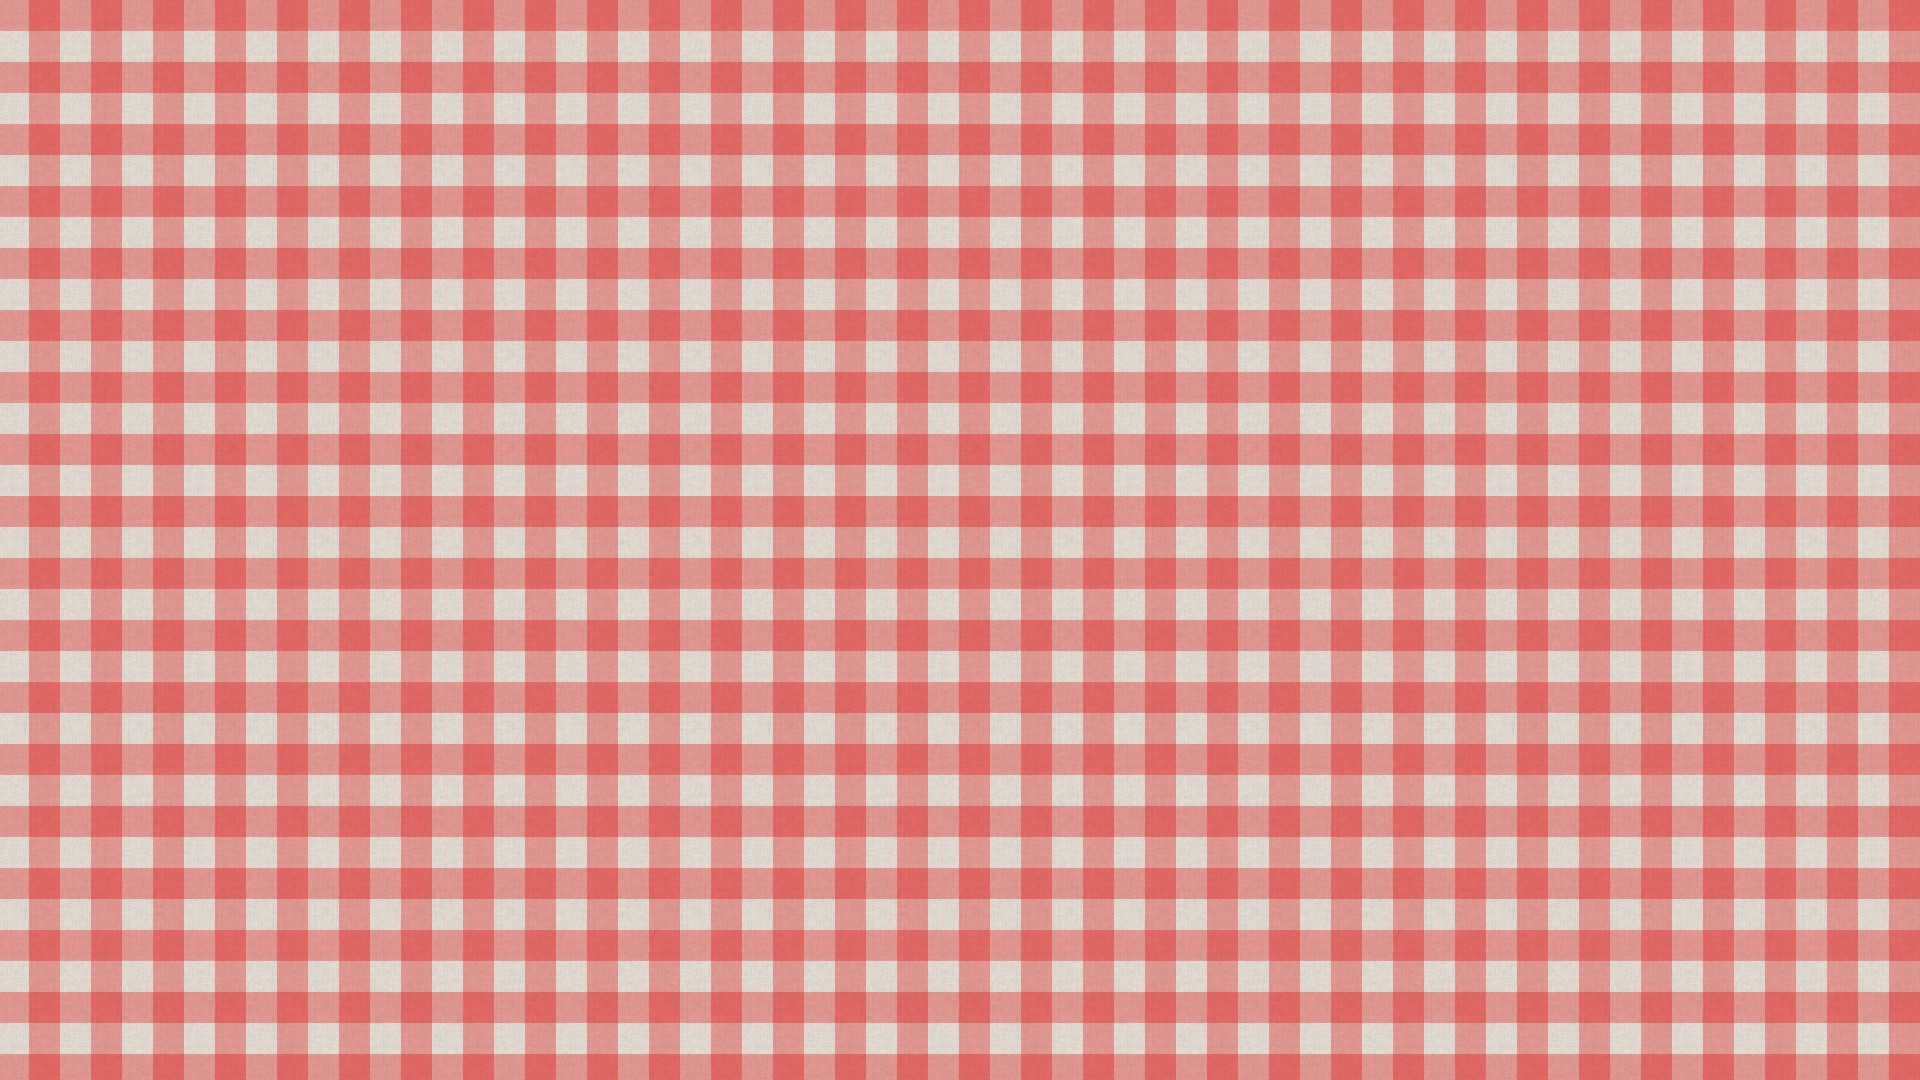 Wallpaper, red, table, pattern, texture, circle, plaid, pink, tablecloths, tartan, tablecloth, material, design, line, textile, 1920x1080 px, bed sheet 1920x1080